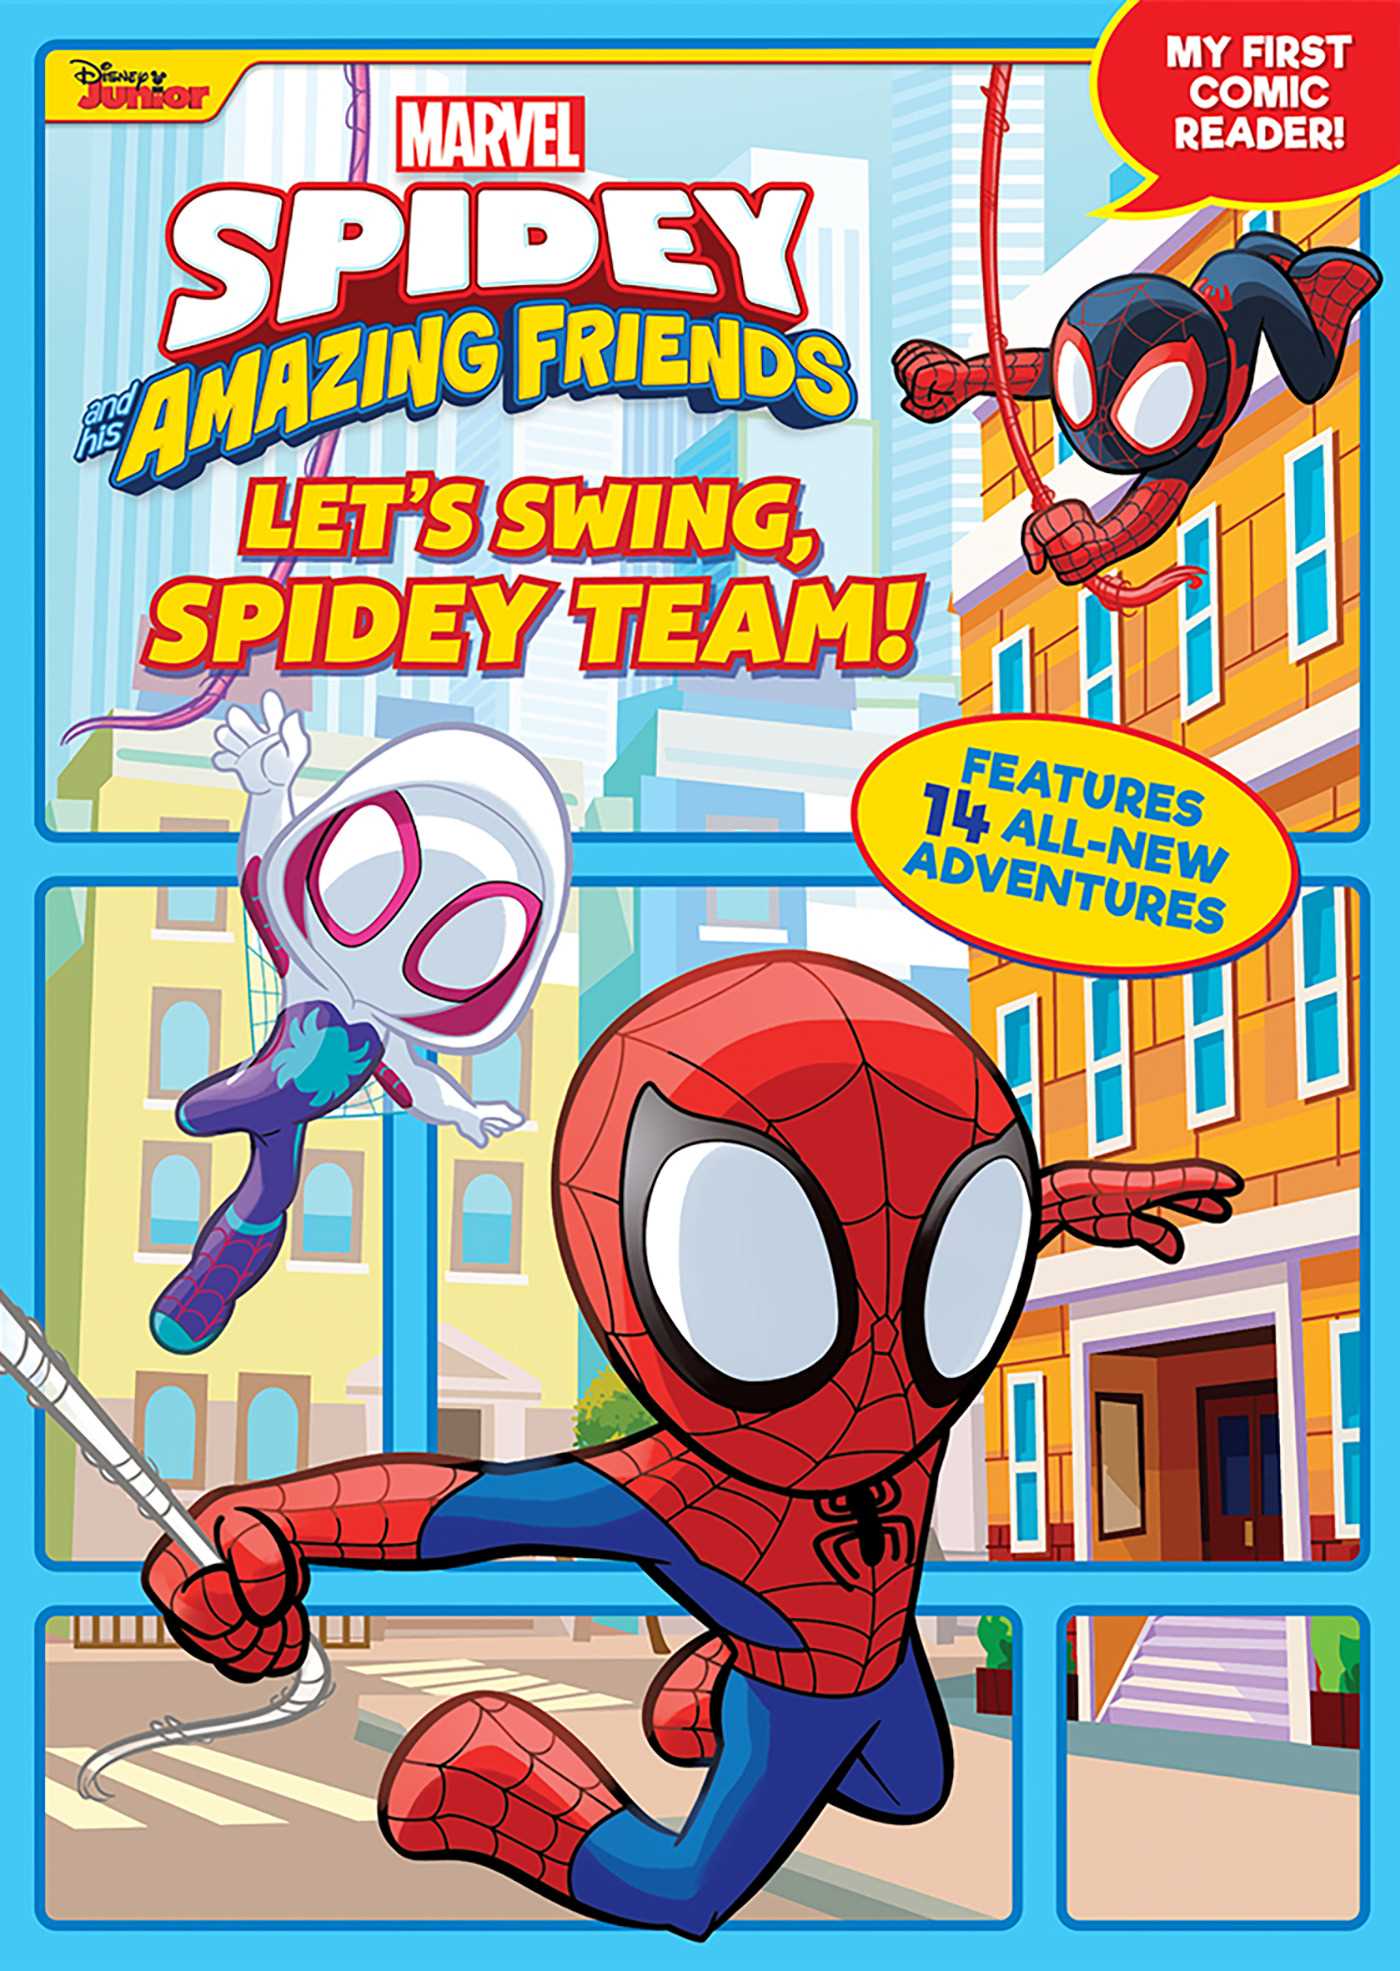 Let's Swing, Spidey Team! (My First Comic Reader!)